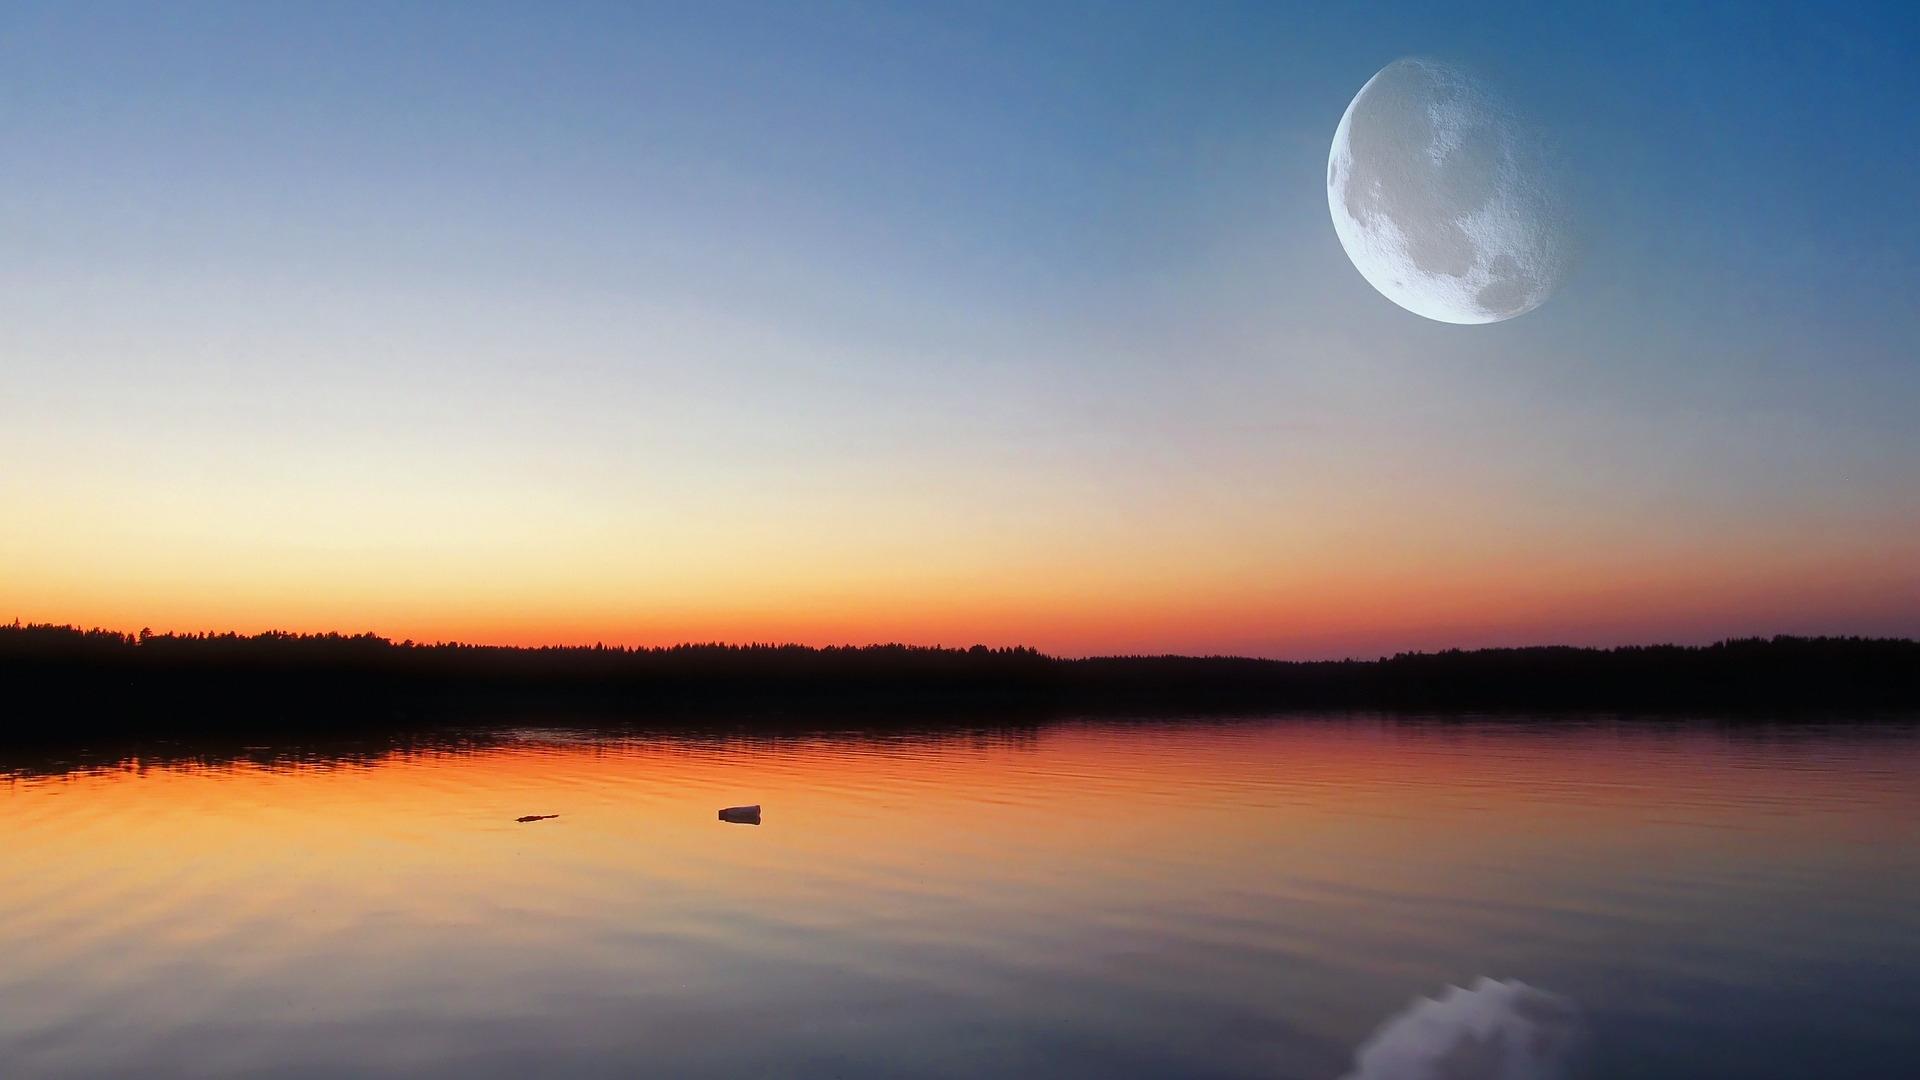 Evening Lake Glow and Moon View Wallpaper